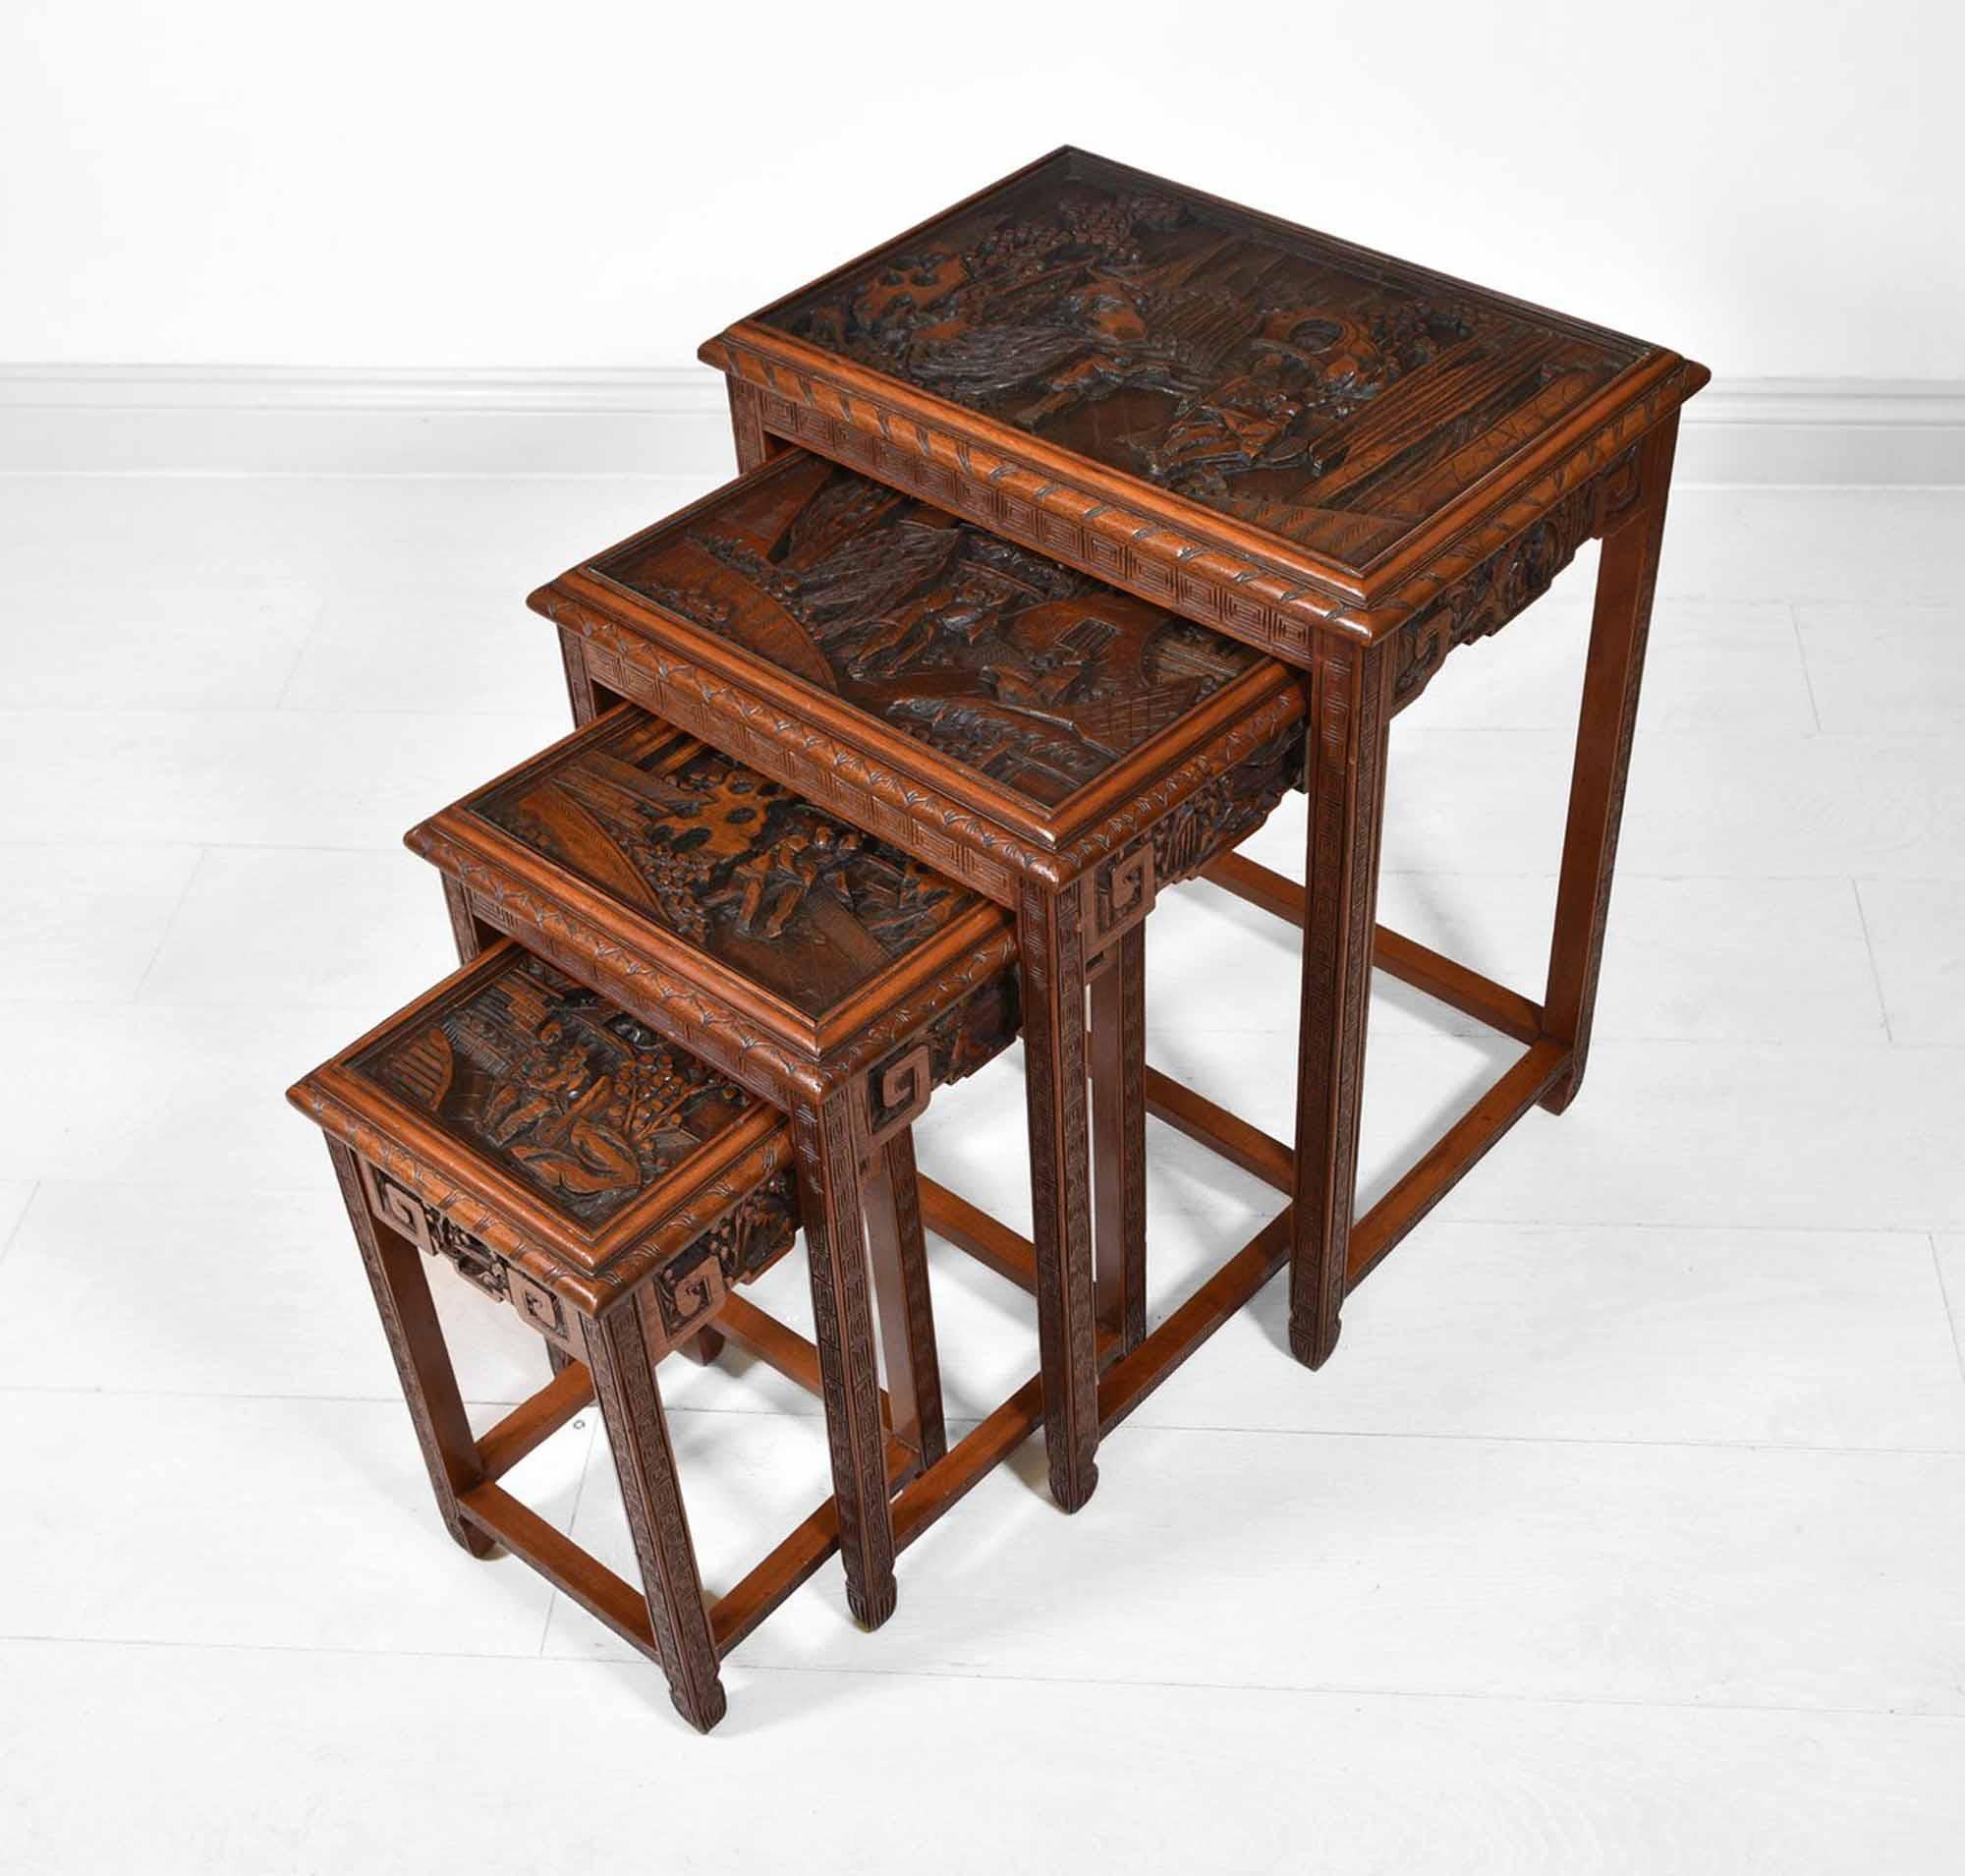 Hand-Carved Vintage Chinese Teak Carved Quartetto Nest of Four Tables with Drawer